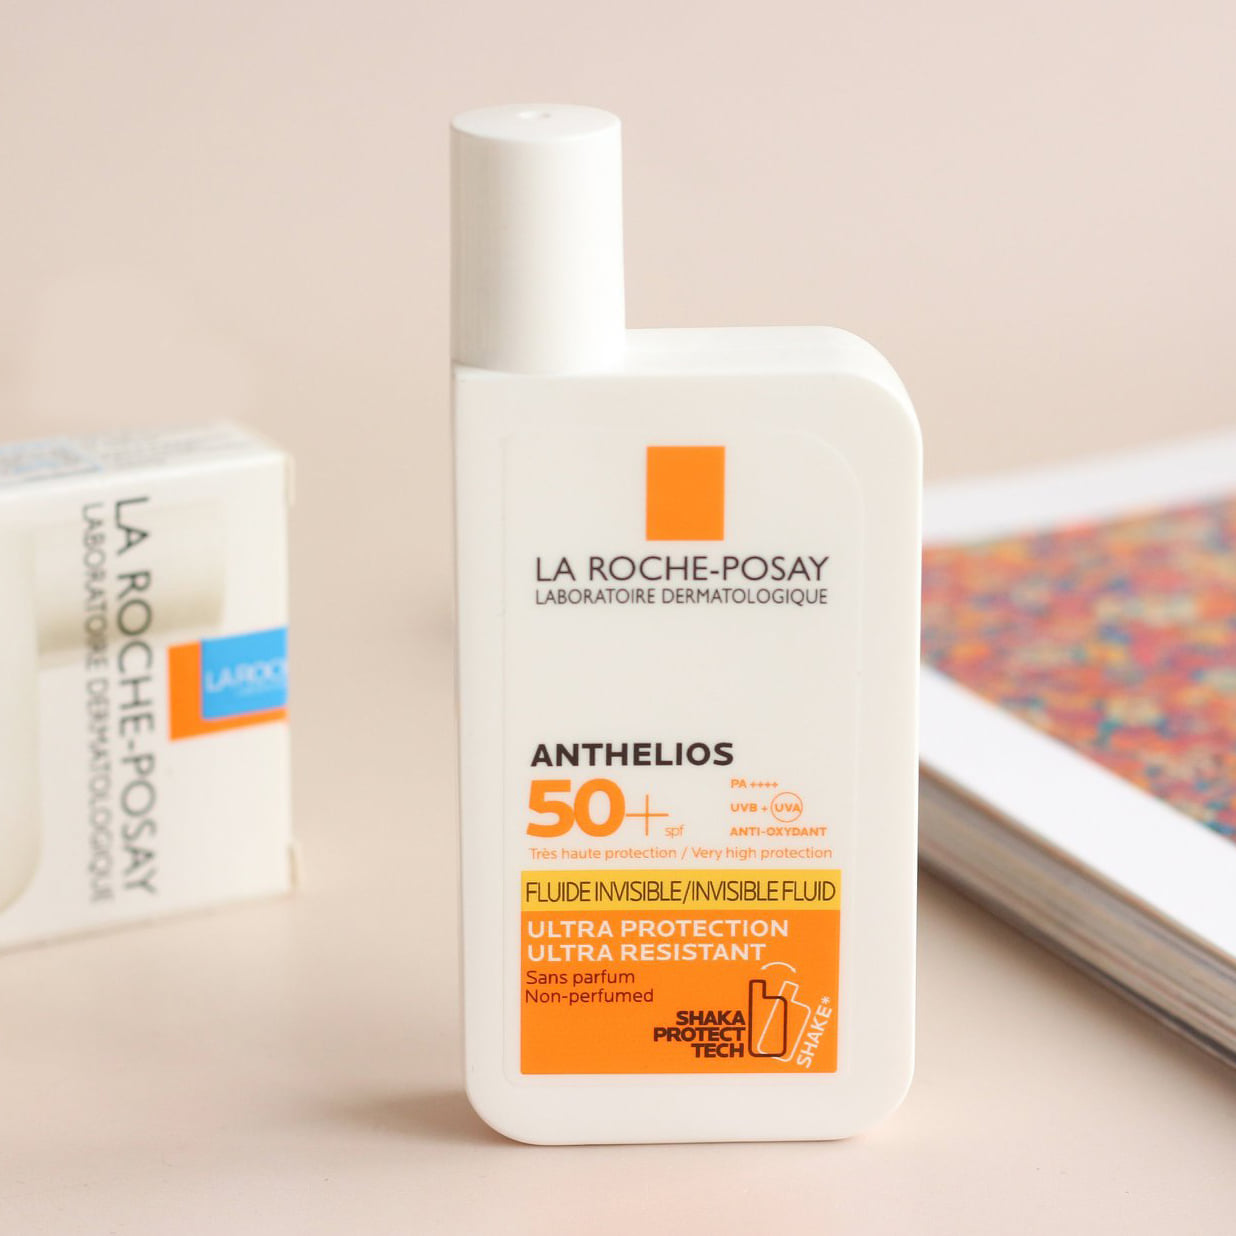 Kem chống nắng La Roche-Posay Anthelios Invisible Fluid SPF50+